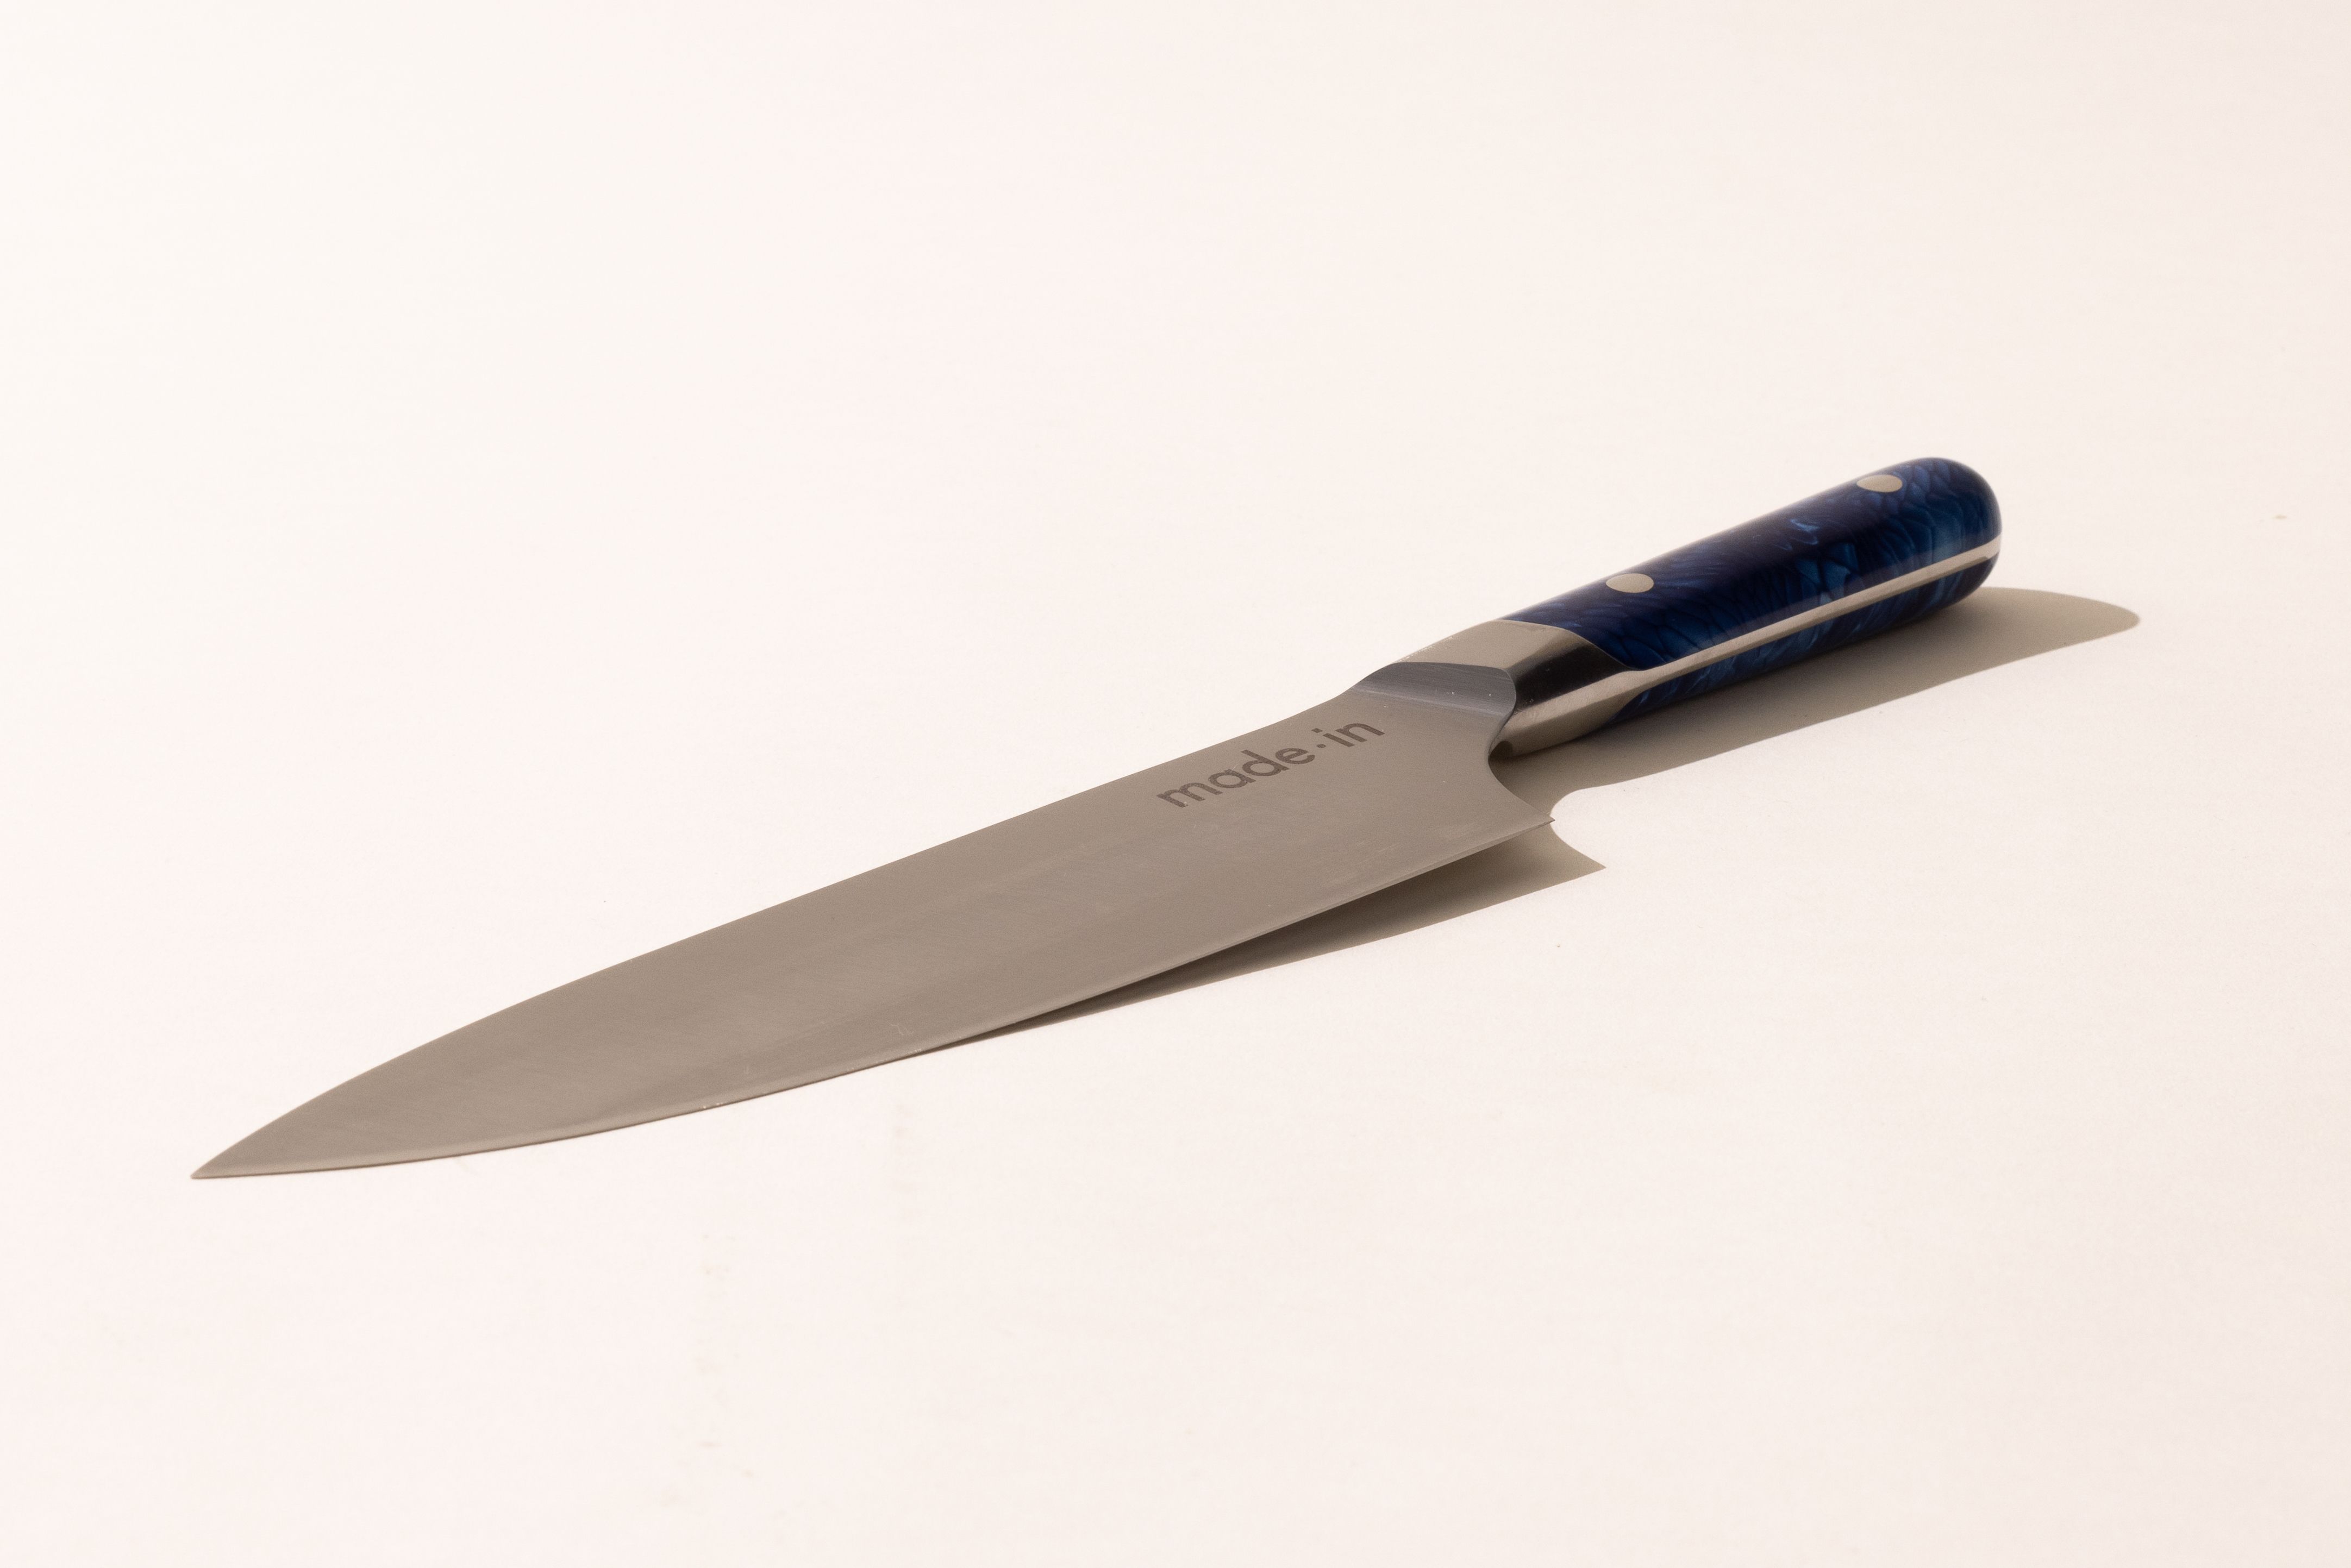 6-inch Chef's Knife Professional Forged